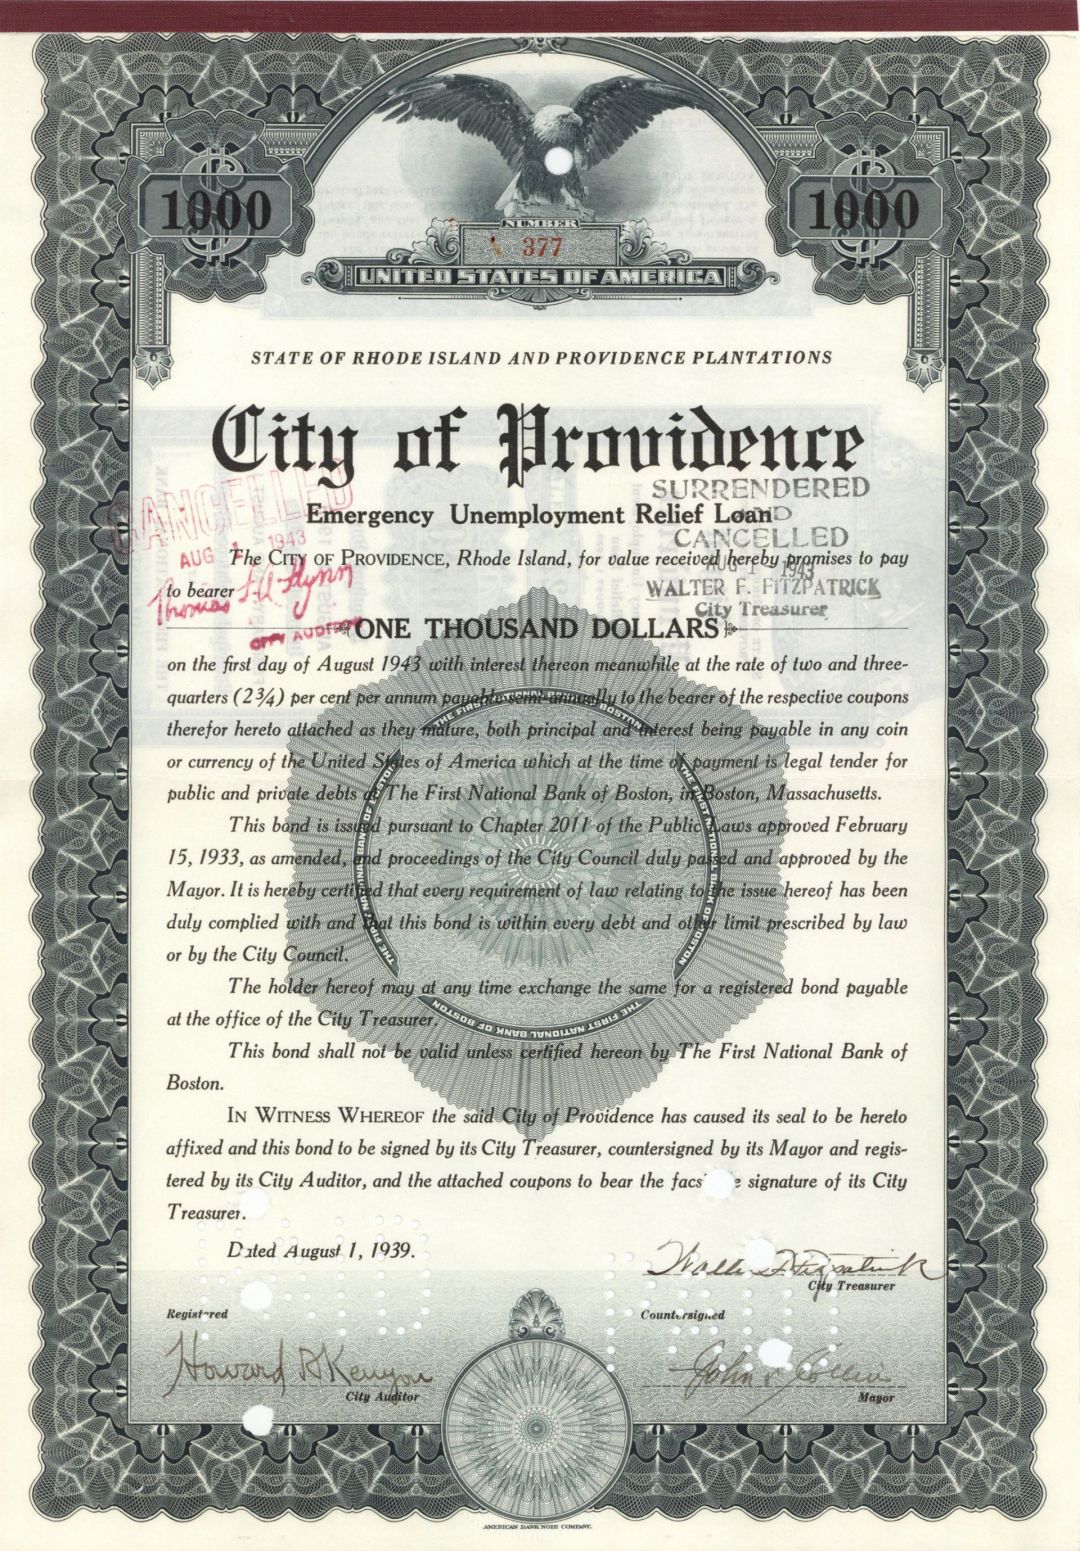 City of Providence - $1,000 Bond - Emergency Unemployment Relief Loan